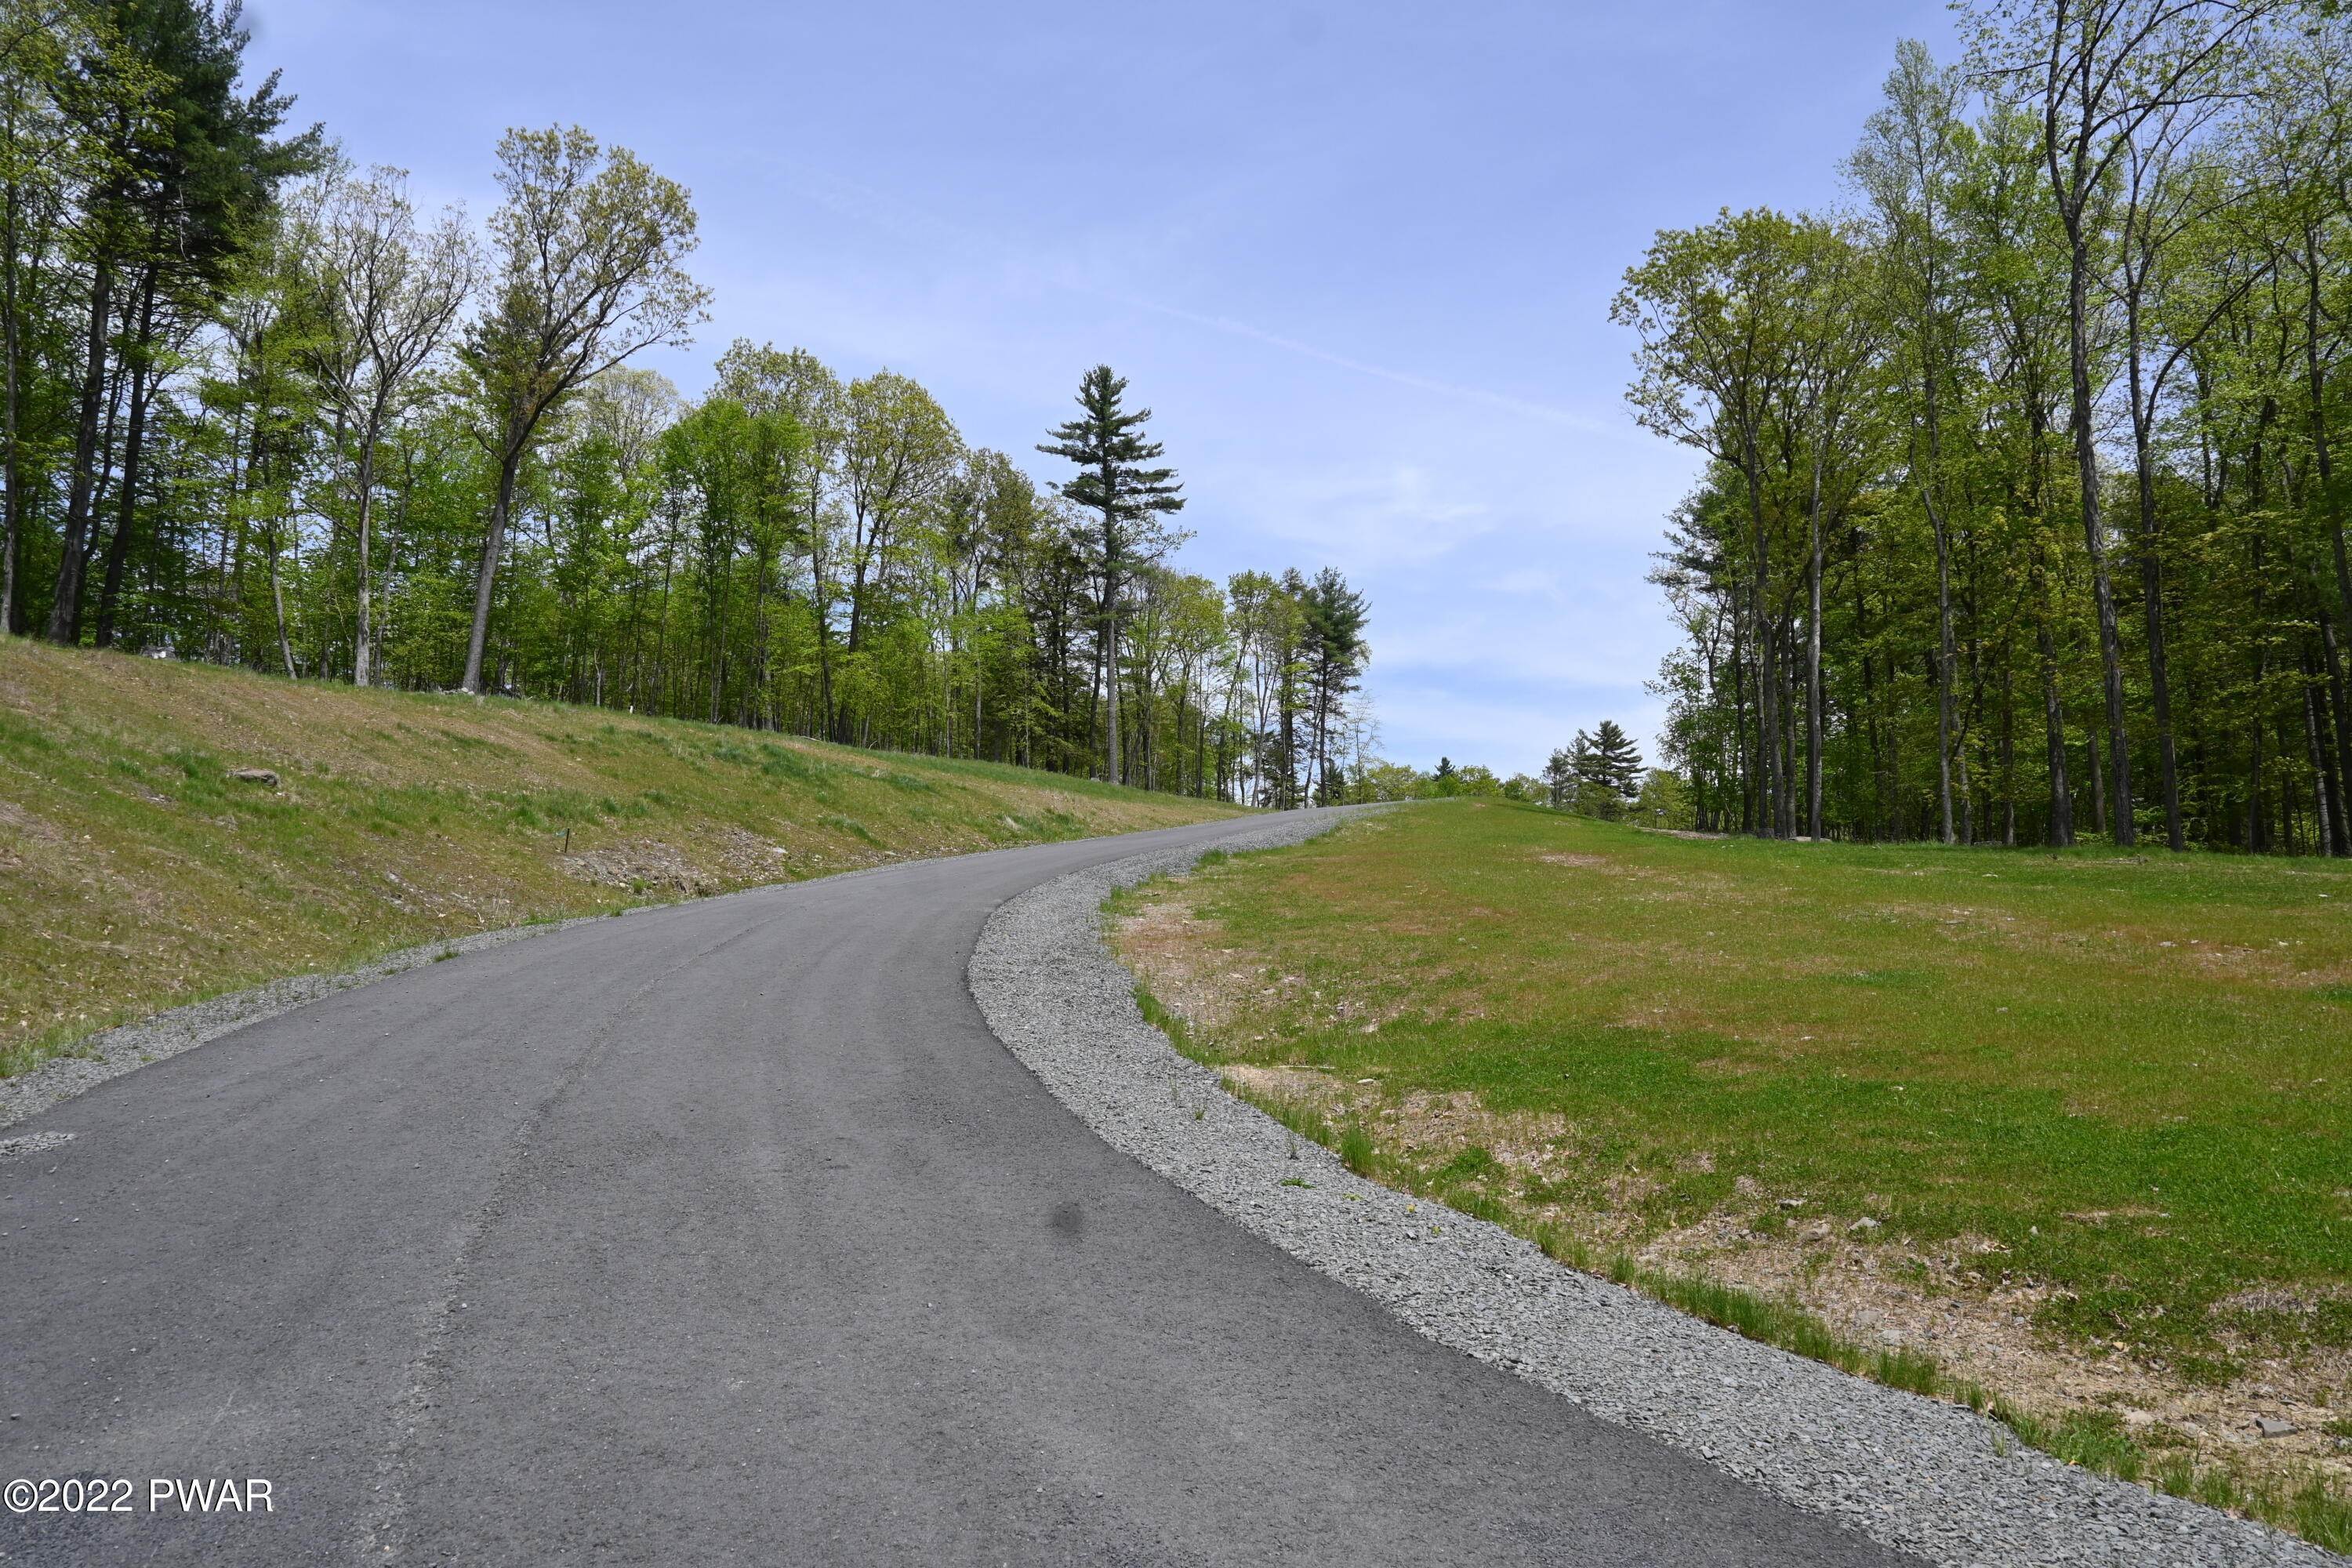 6. Land for Sale at Ridgecrest Ln Milford, Pennsylvania 18337 United States